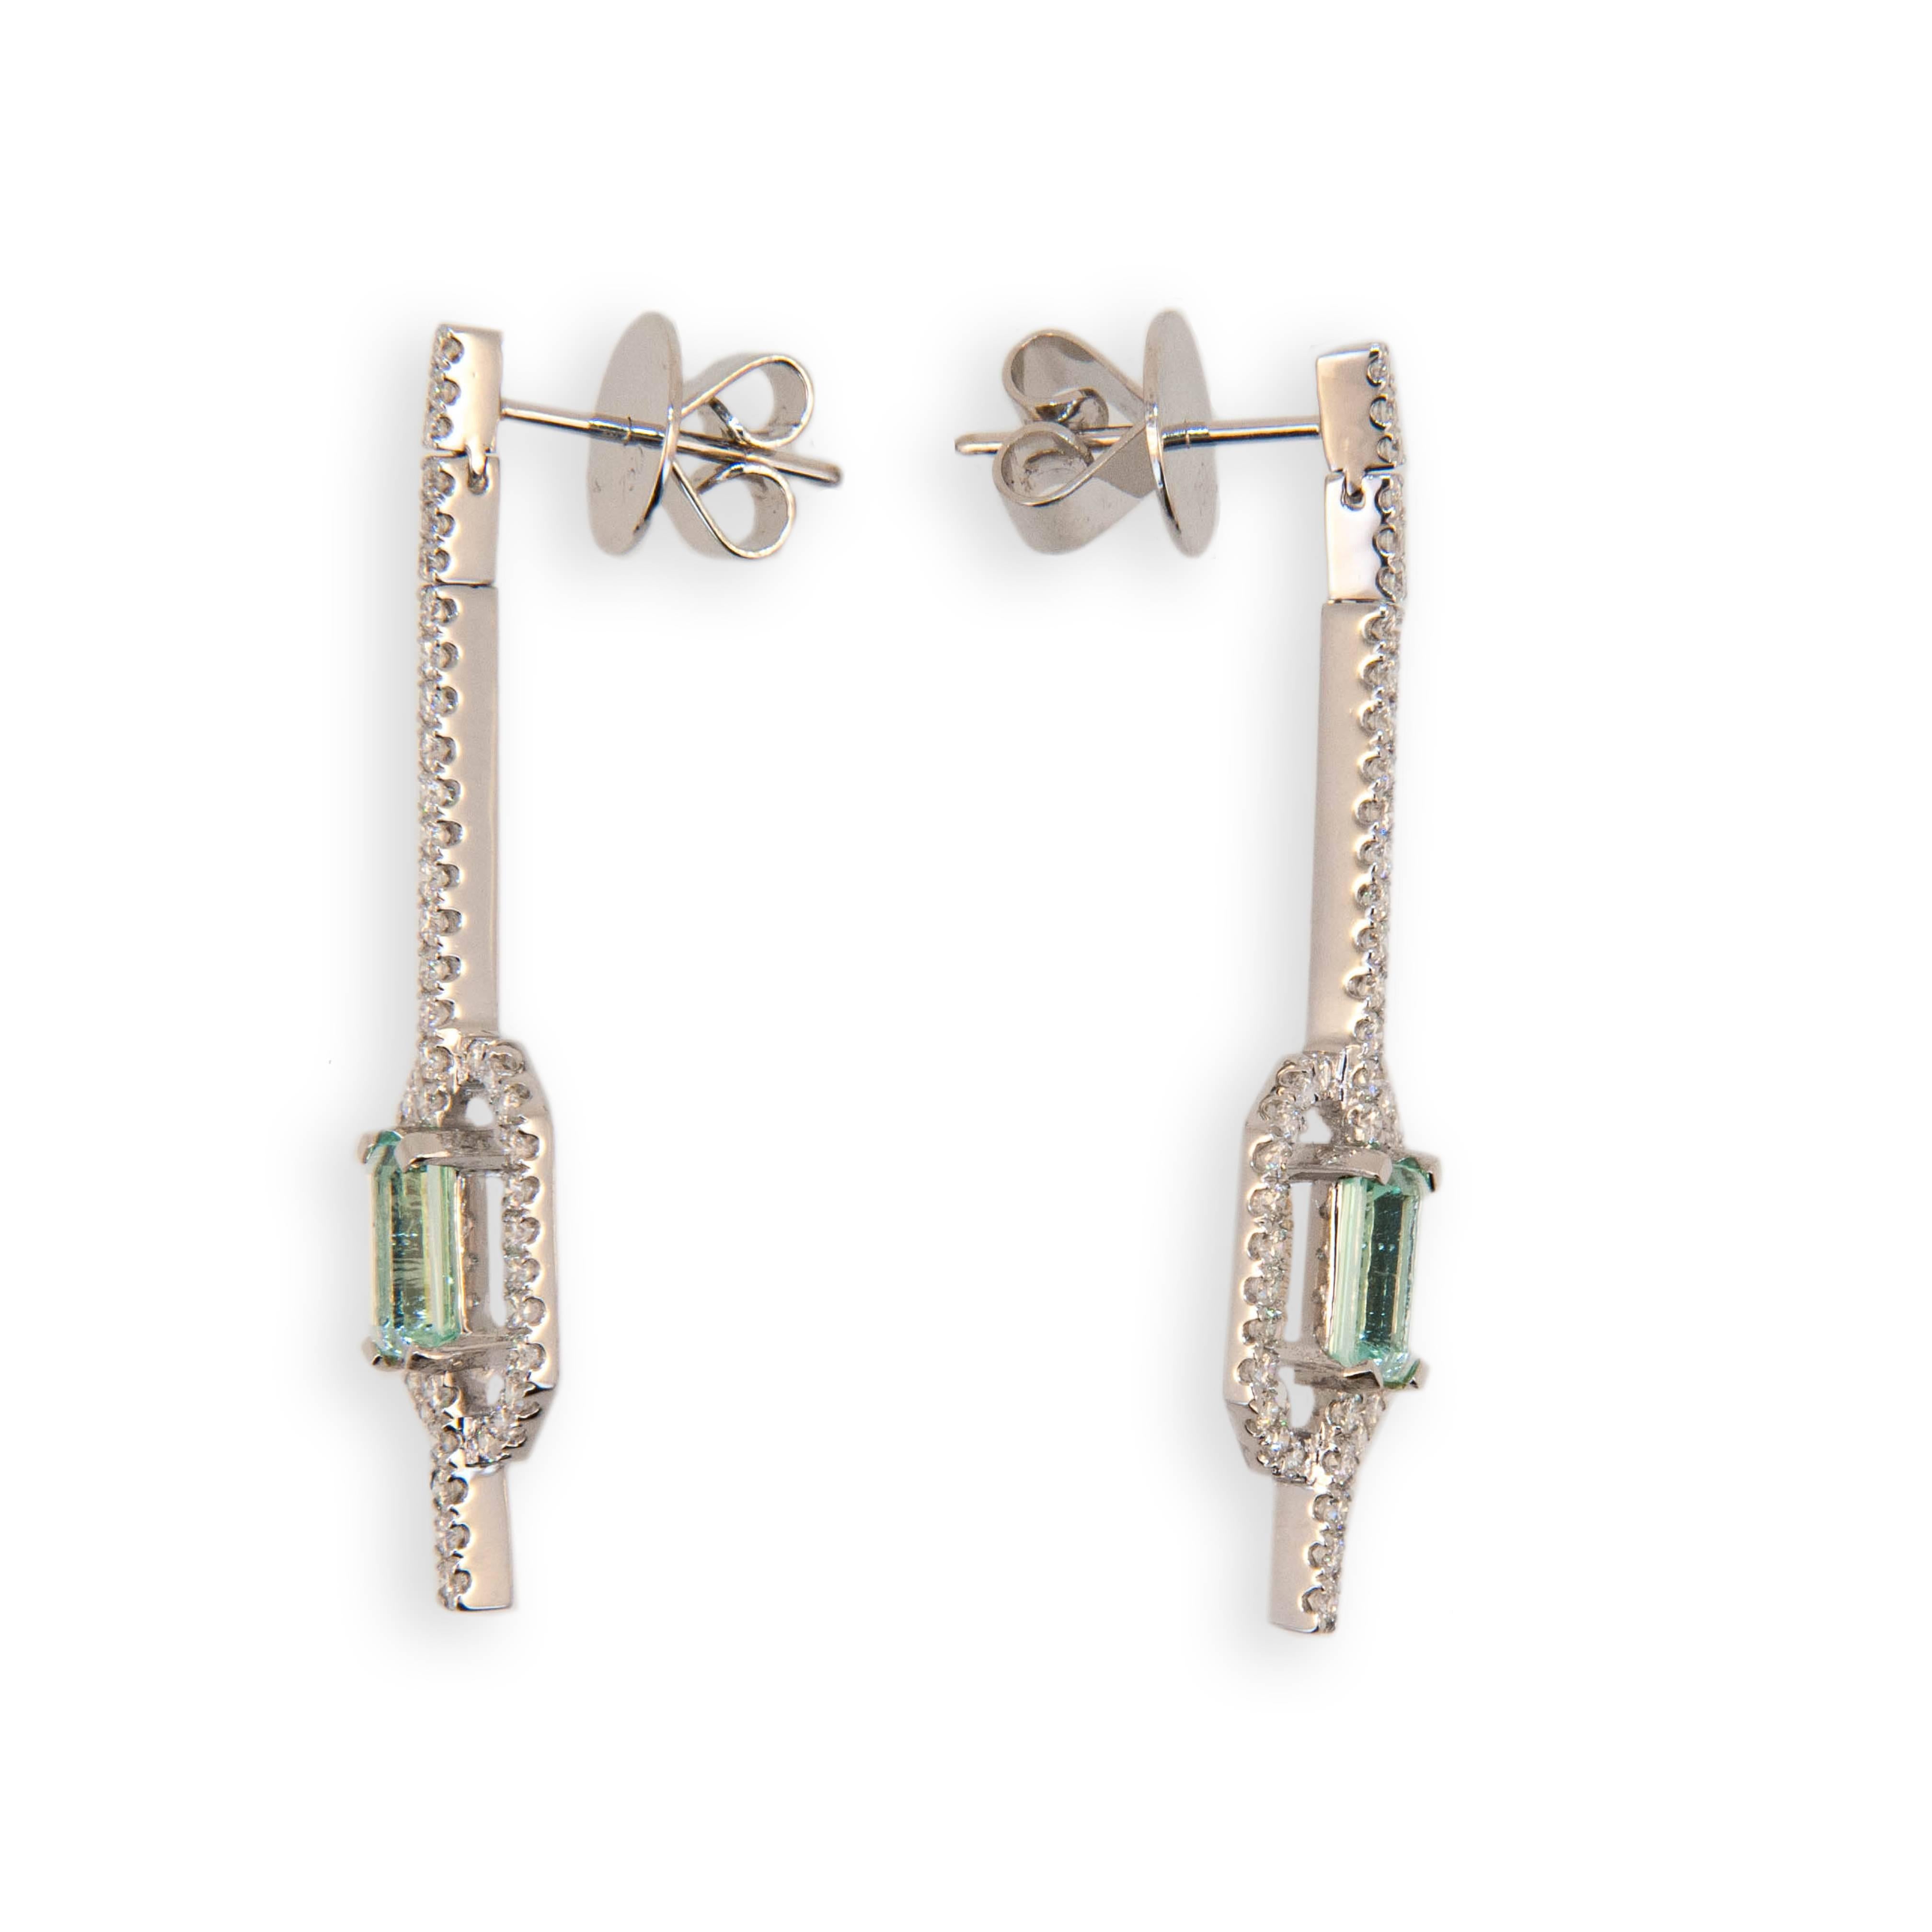 18 karat white gold earrings each set with one emerald cut Mint Green Tourmaline two are 1.58 carats total weight. Micro-set in a straight line from post and in an octagonal frame around Tourmaline are 47 Diamonds 94 total .93 carat total weight.